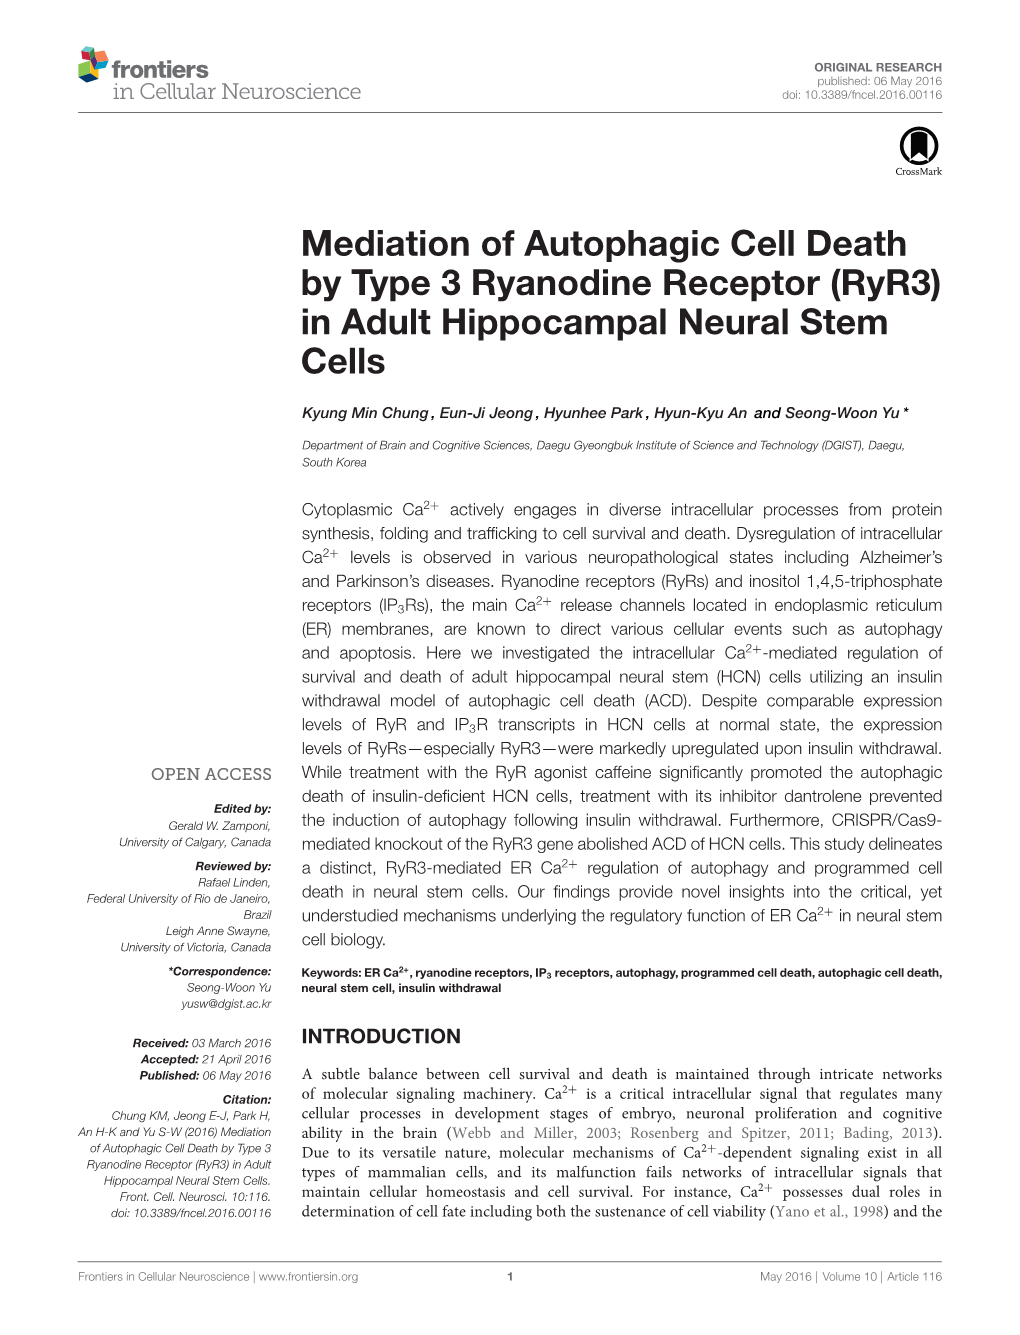 Mediation of Autophagic Cell Death by Type 3 Ryanodine Receptor (Ryr3) in Adult Hippocampal Neural Stem Cells